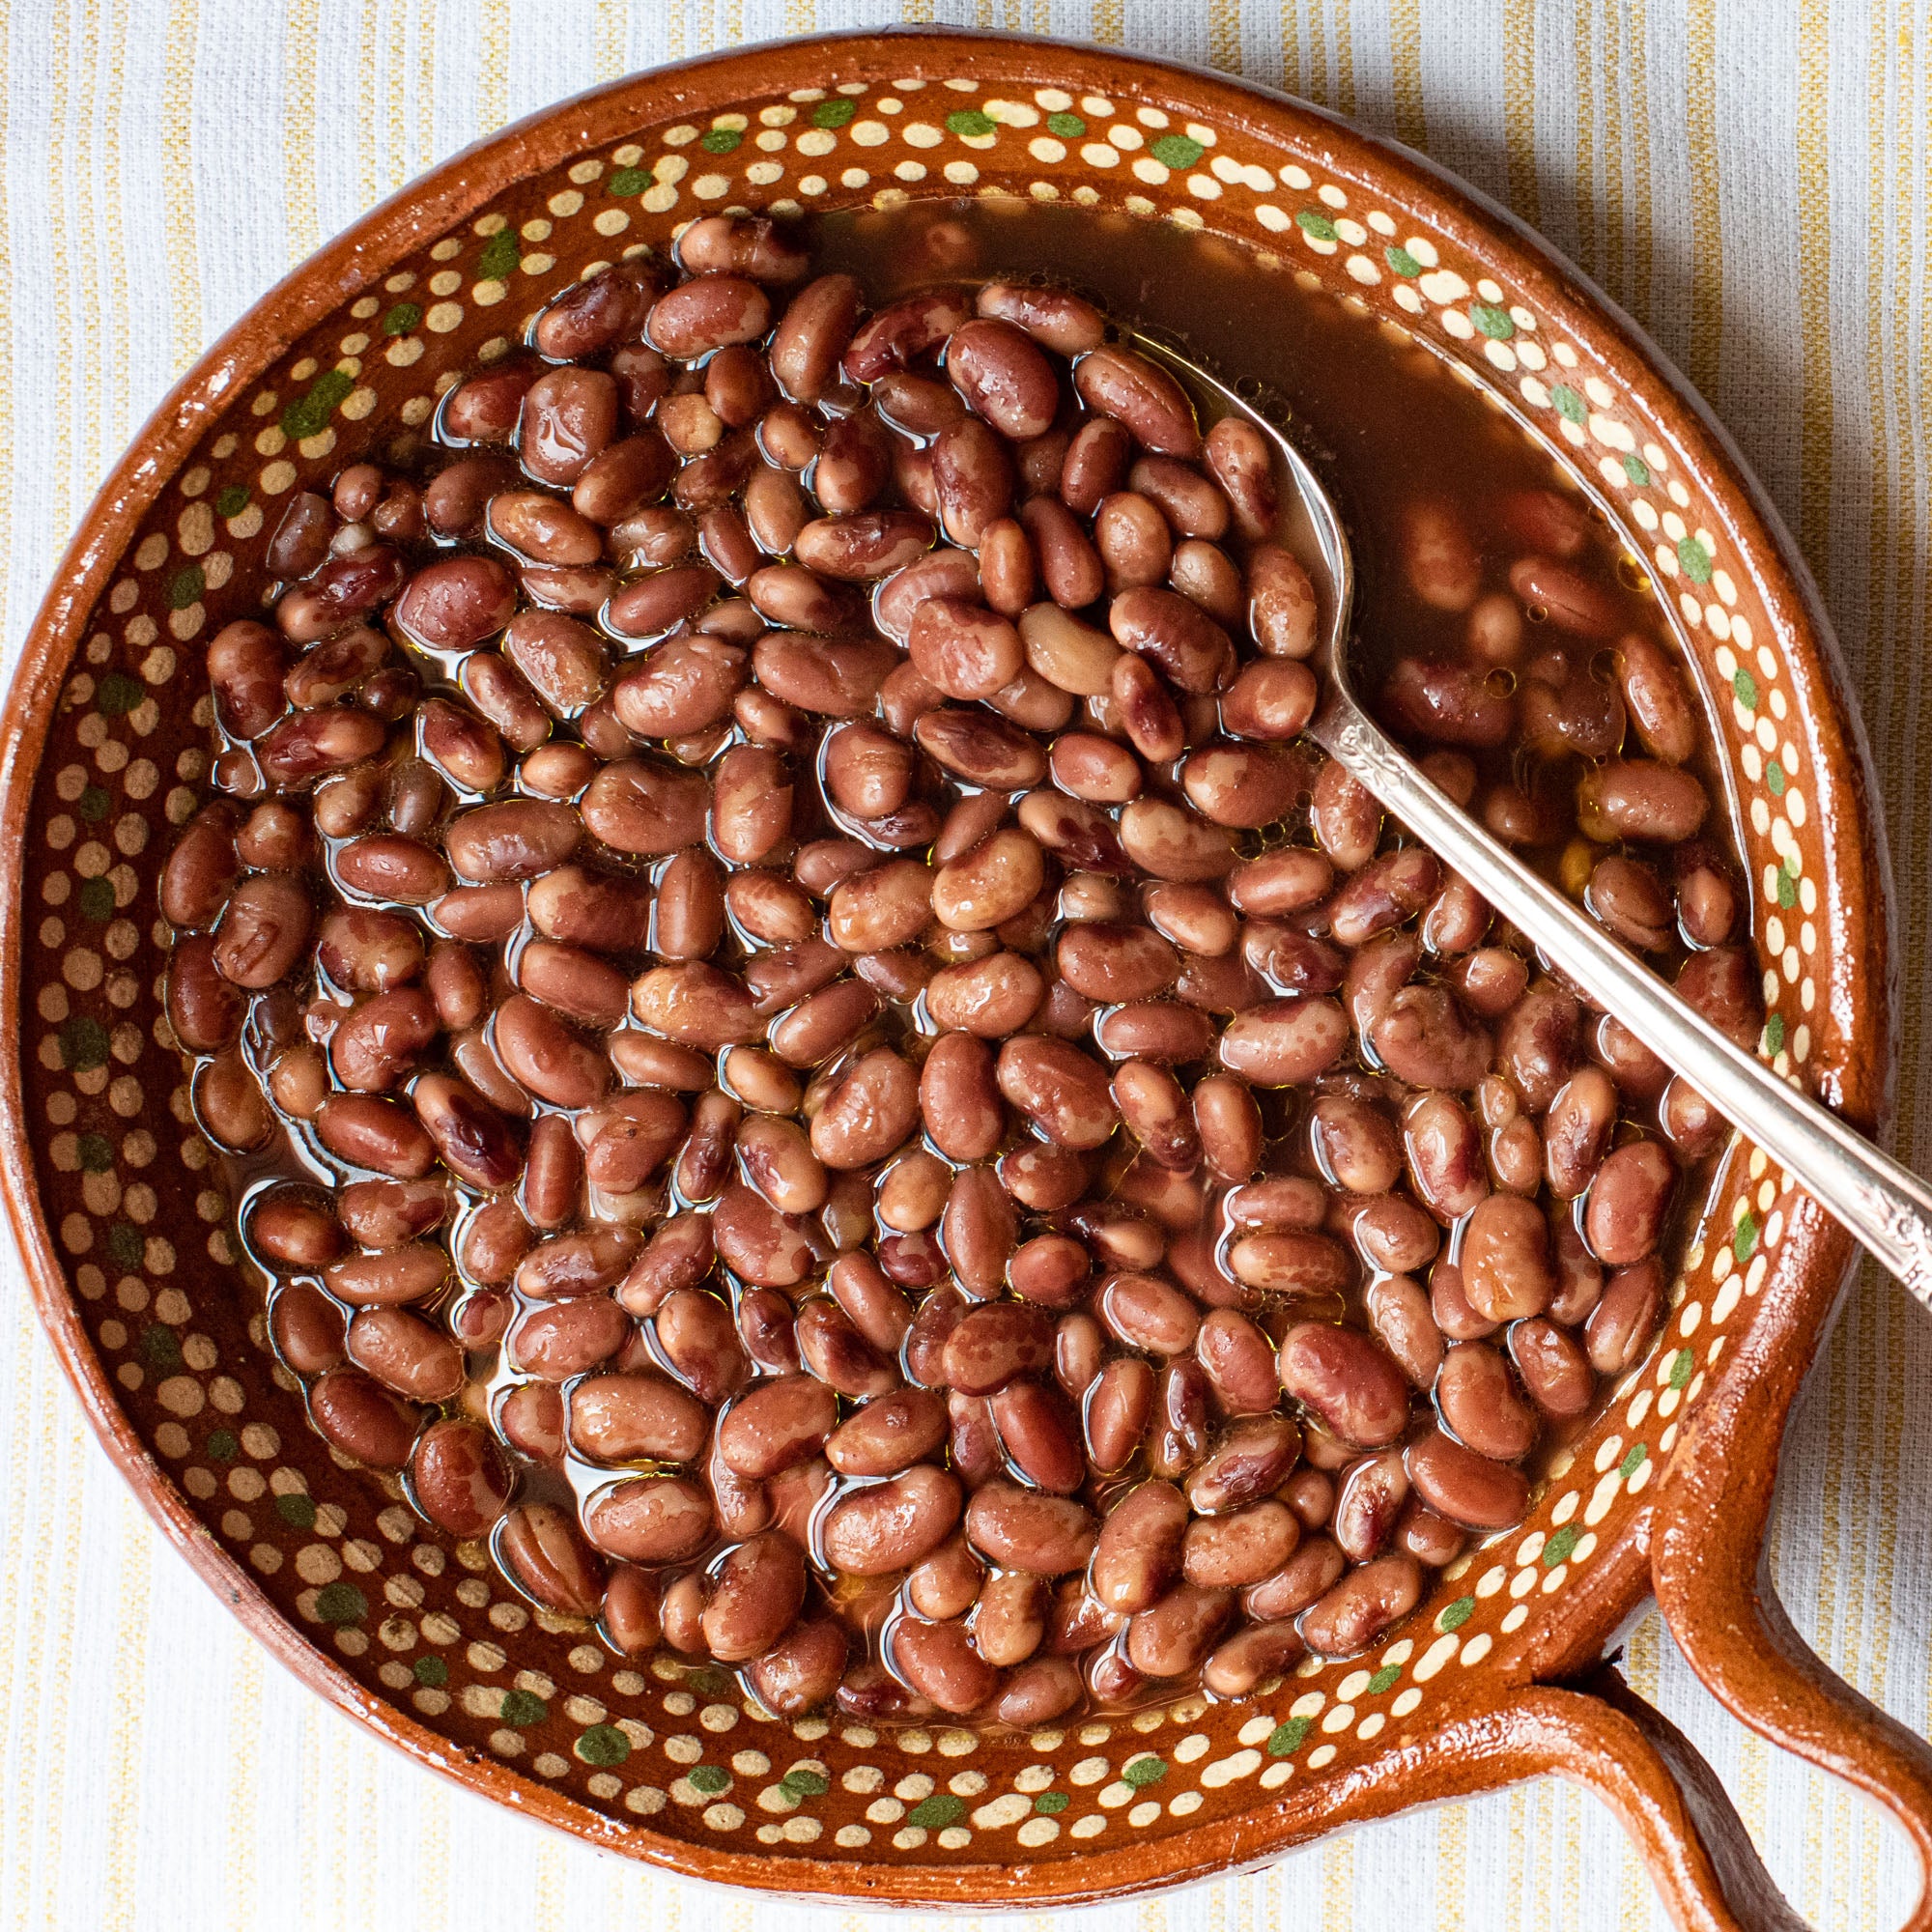 Primary Beans Organic Southwest Red Beans